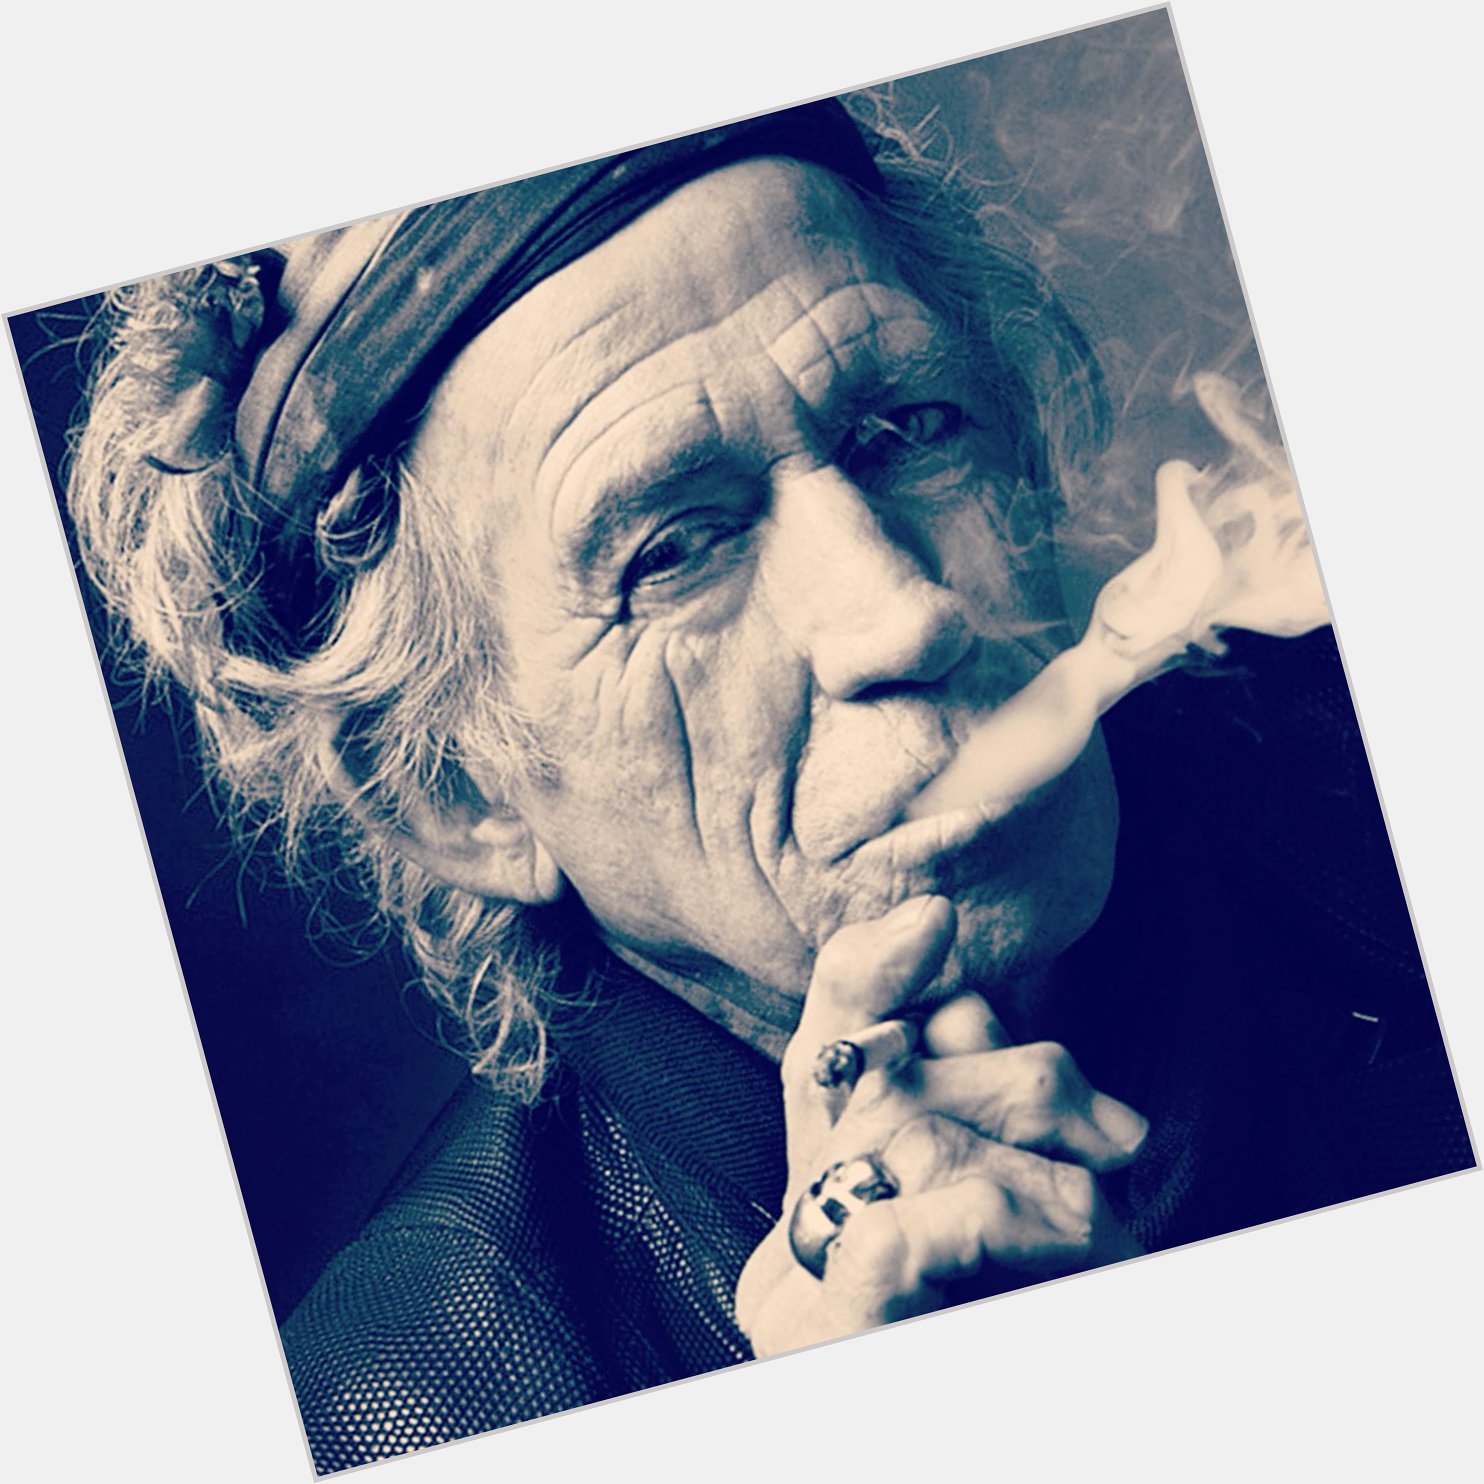 Happy 77th birthday to Keith Richards! All hail the Undying One! 